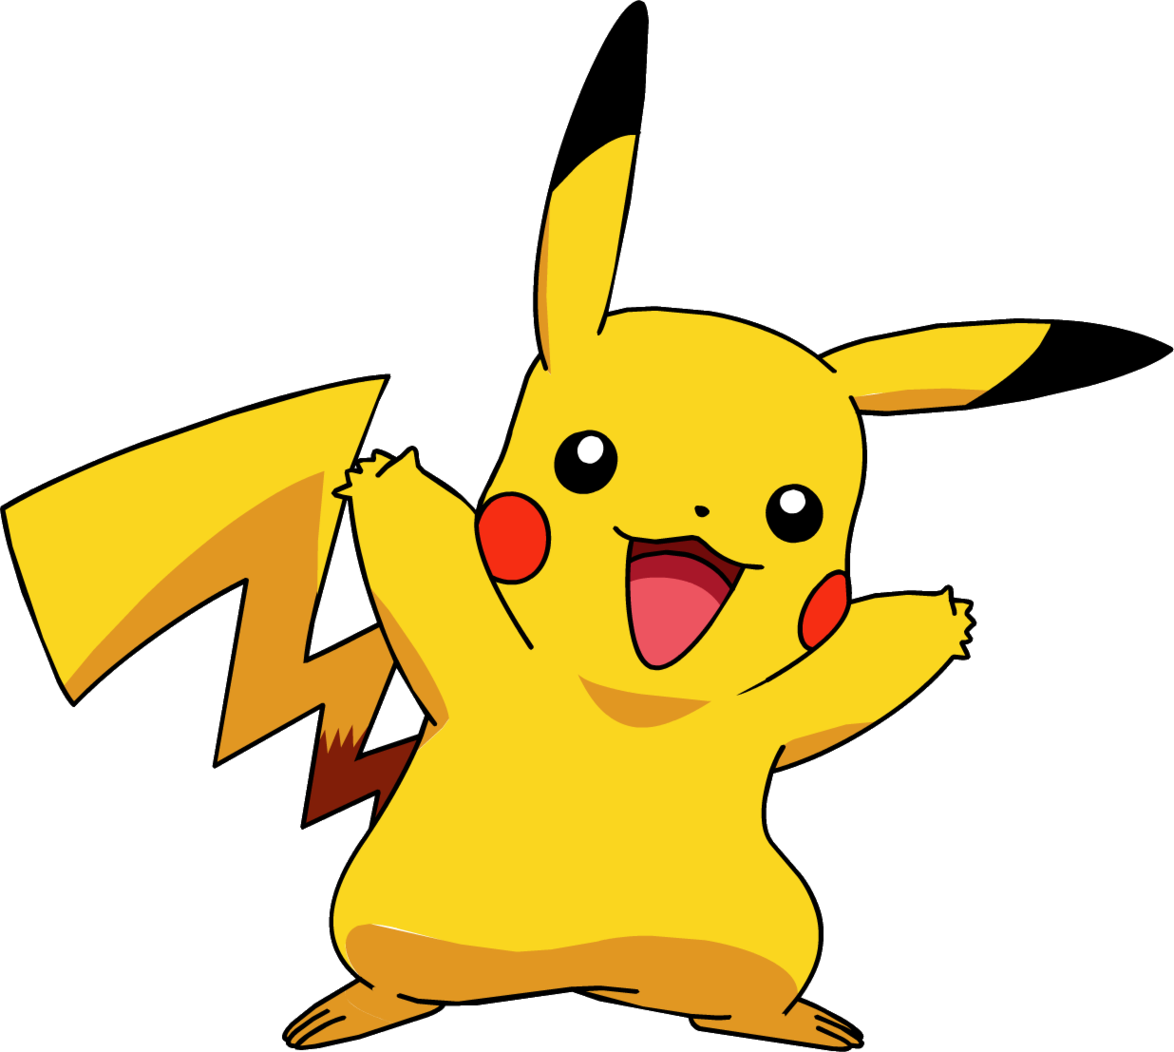 ... Clipart Pikachu Free Clipart - Free to use Clip Art Resource ...